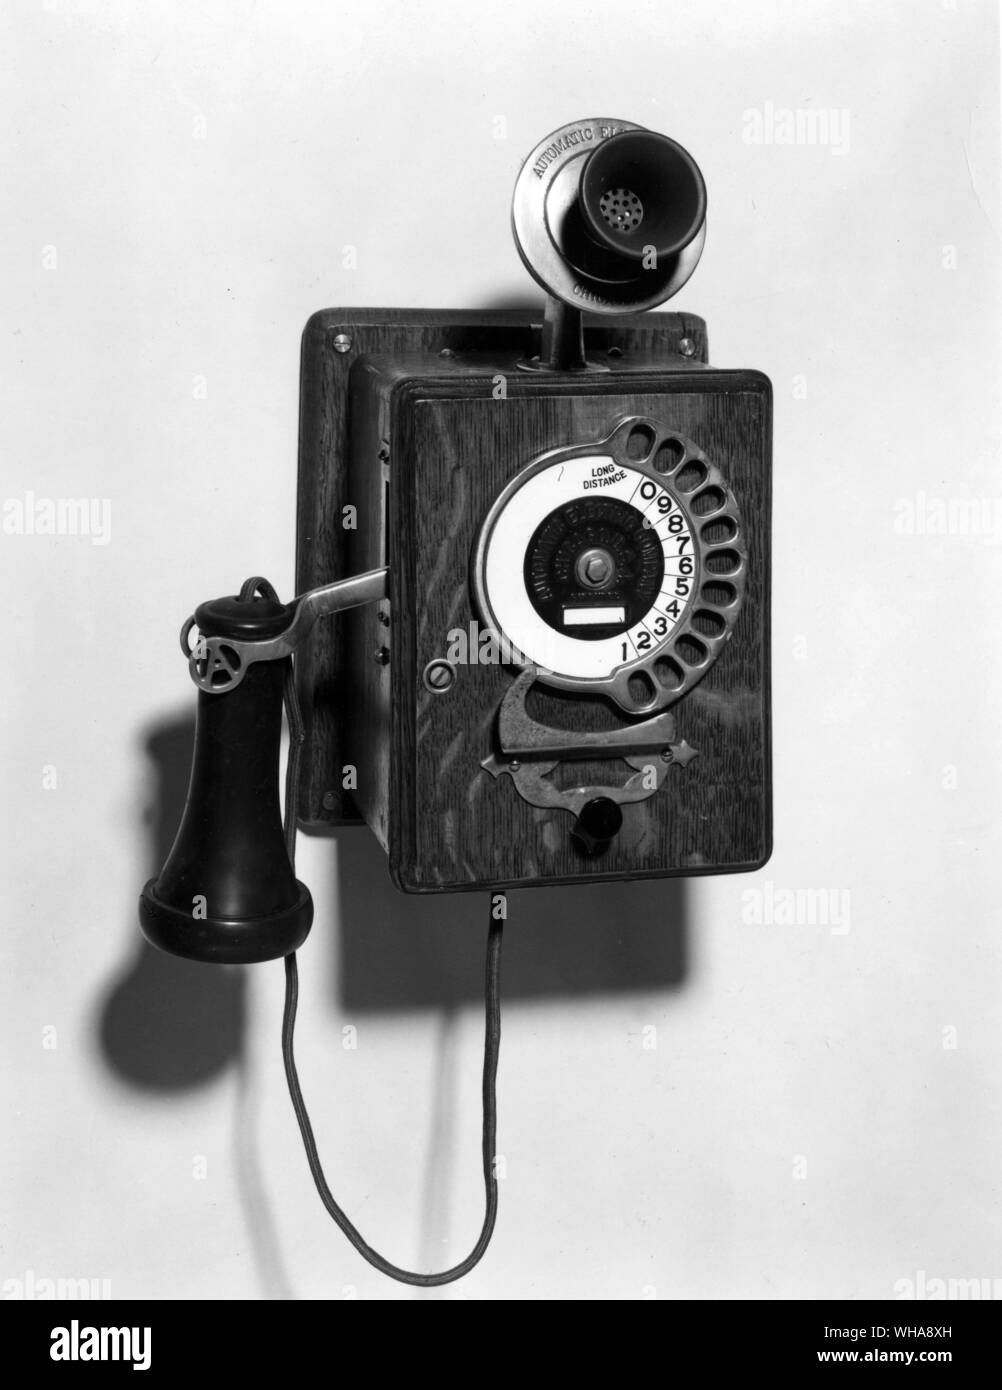 Strowger automatic telephone Stock Photo